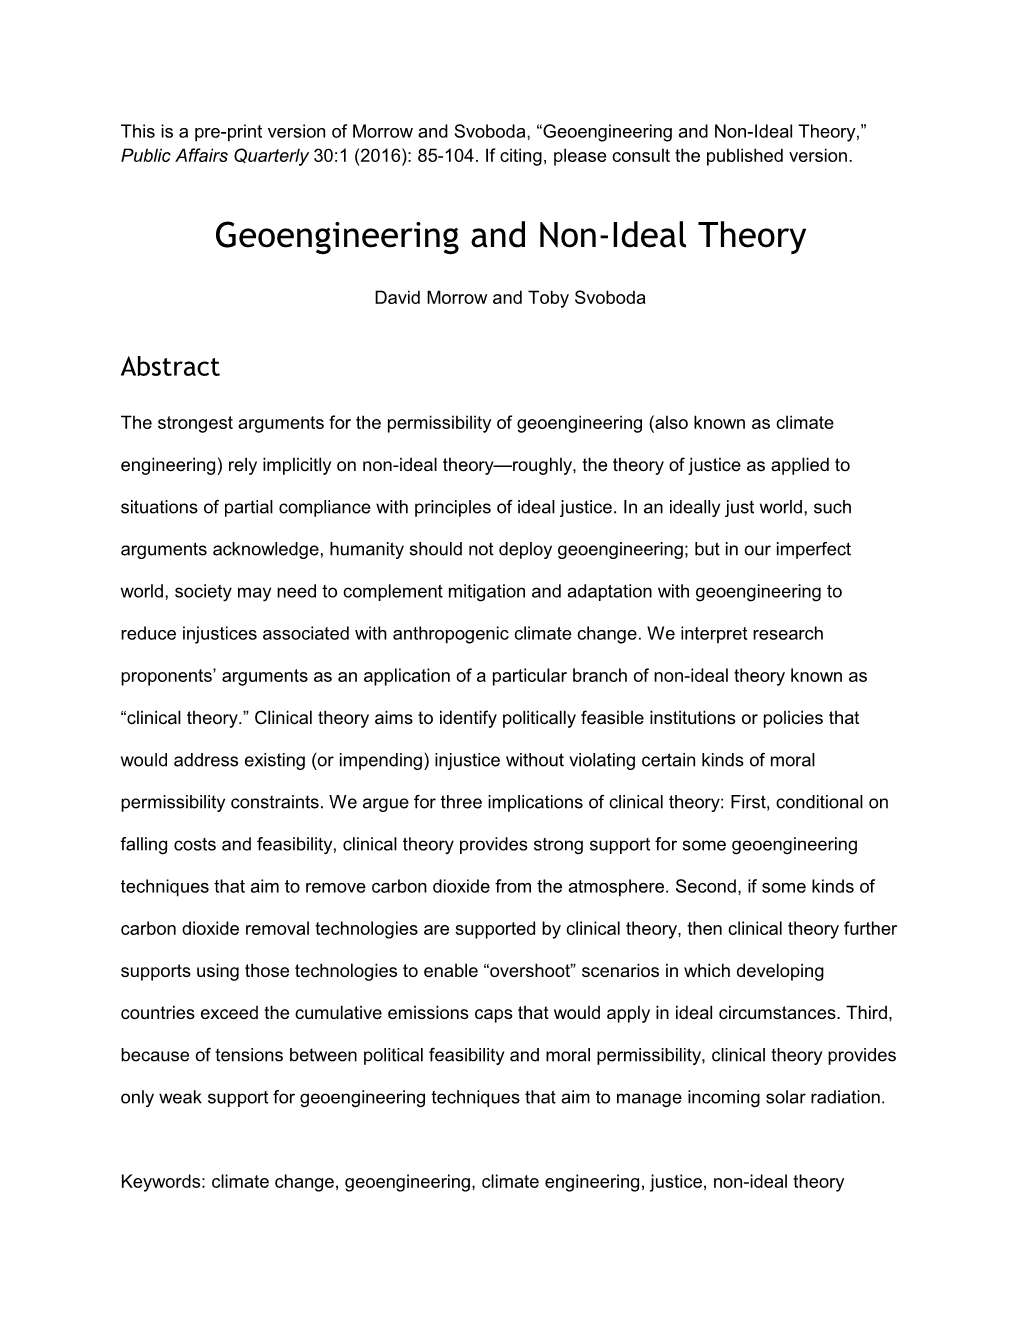 Geoengineering and Non-Ideal Theory,” Public Affairs Quarterly 30:1 (2016): 85-104